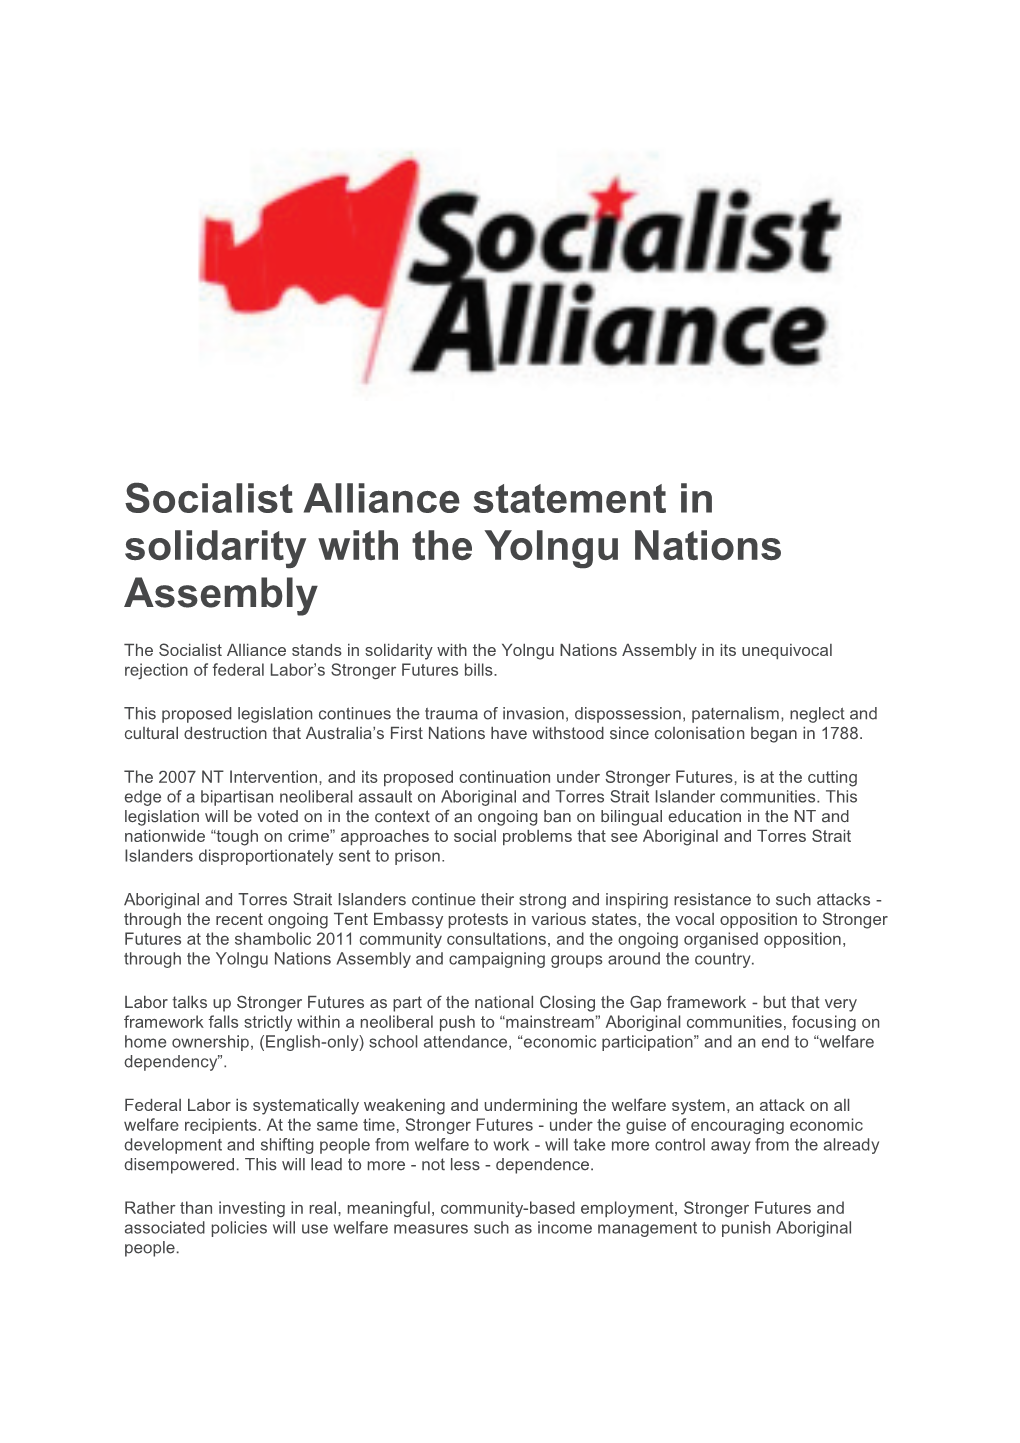 Socialist Alliance Statement in Solidarity with the Yolngu Nations Assembly